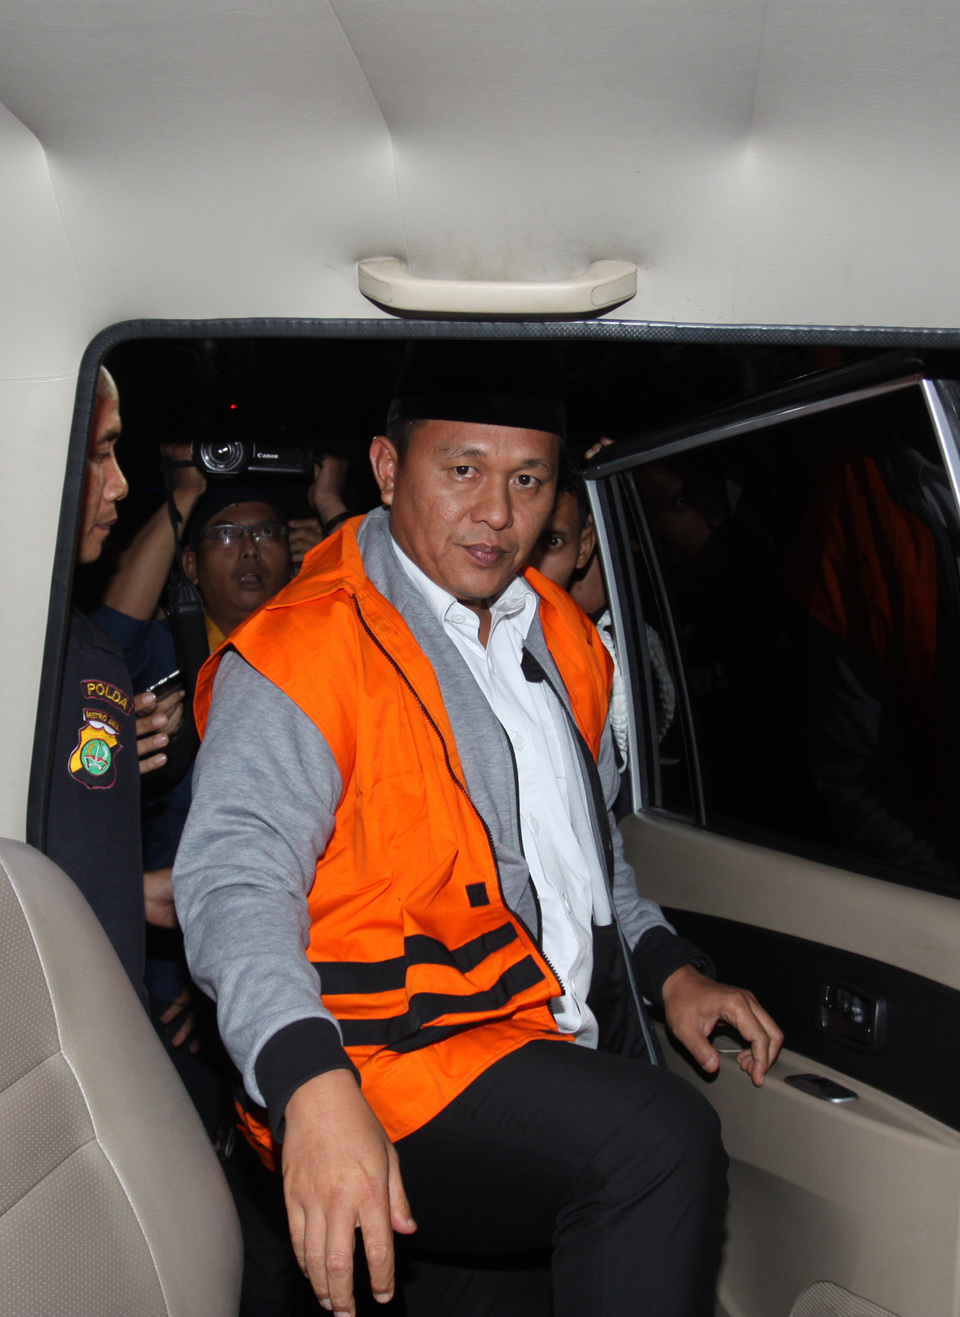 The Corruption Eradication Commission (KPK) named Central Lampung district head Mustafa a suspect on Friday (16/02) following his arrest on bribery allegations involving a loan from state-owned financing company Sarana Multi Infrastruktur (SMI). (Antara Photo/Reno Esnir)